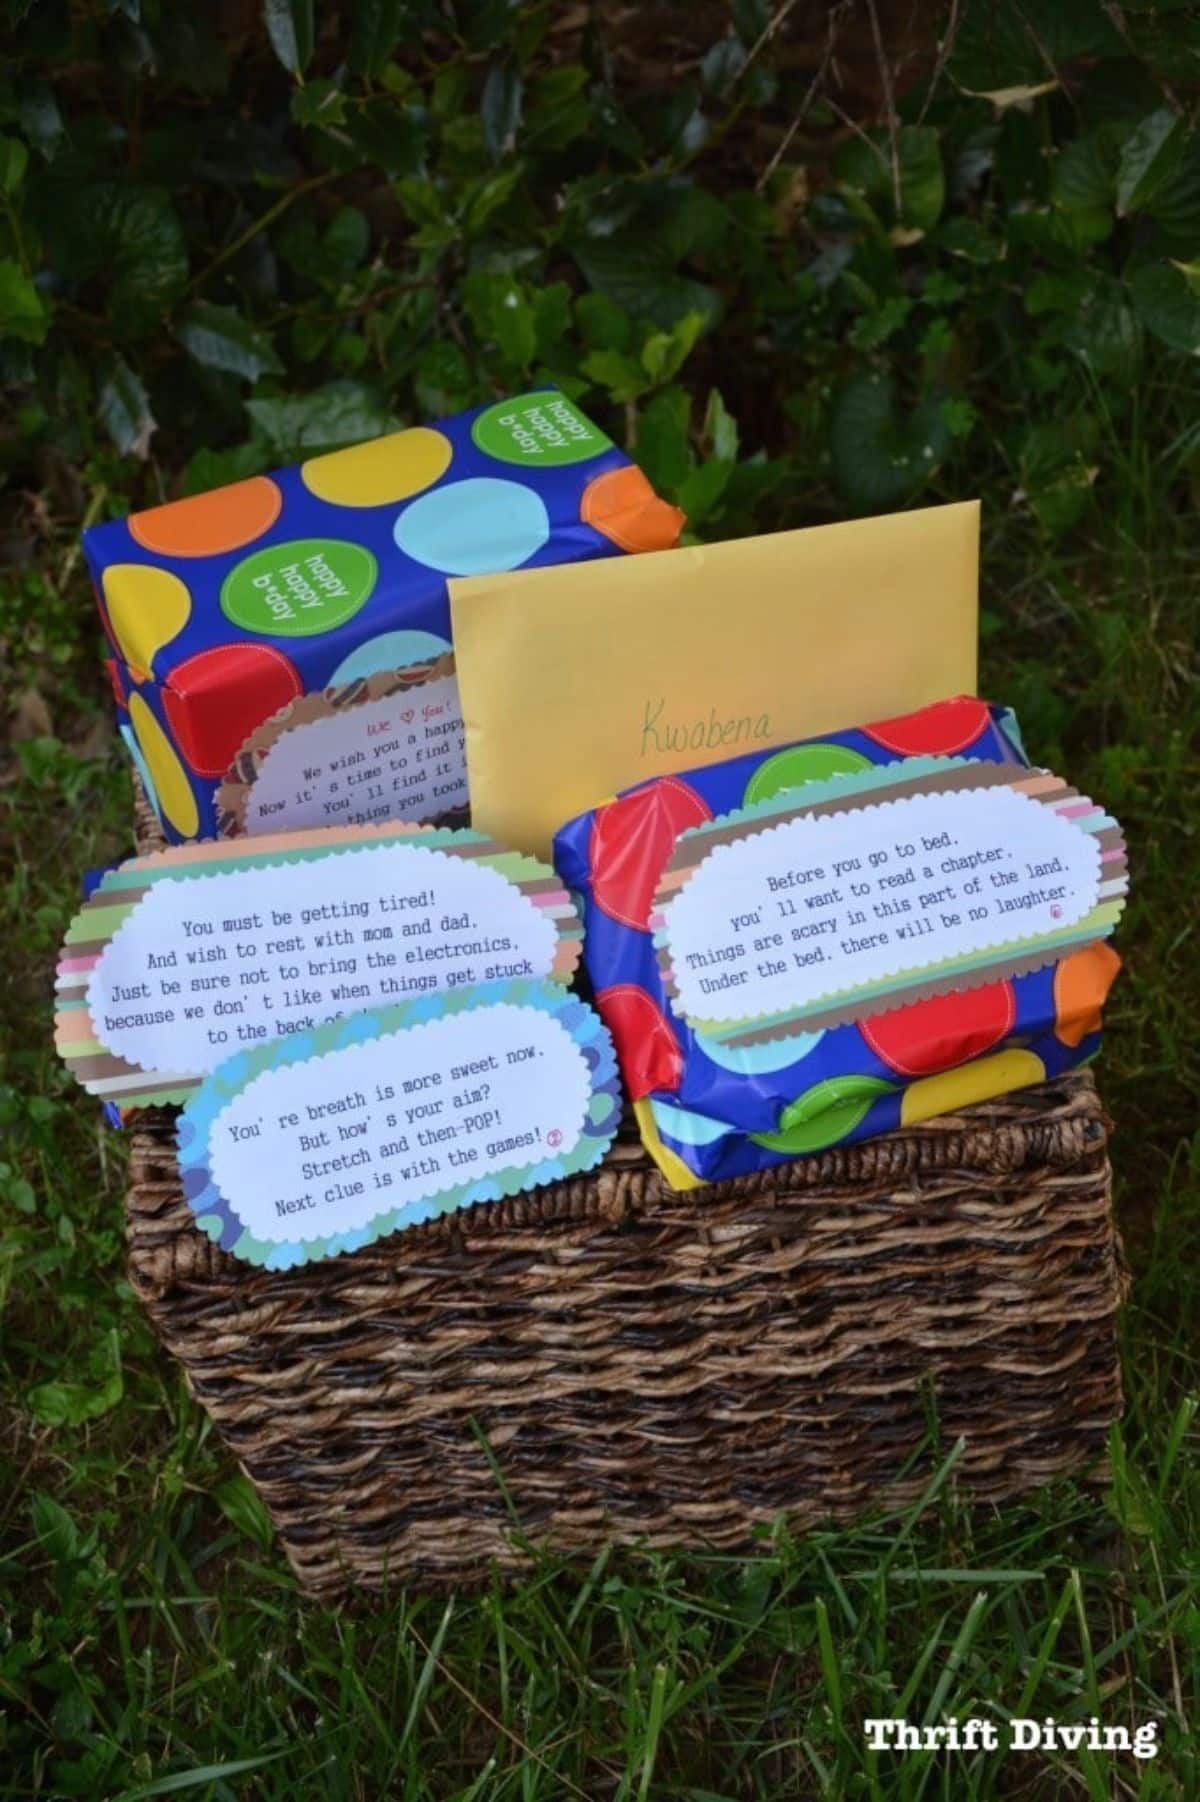 Basket full of scavenger hunt gifts with cards with instructions.